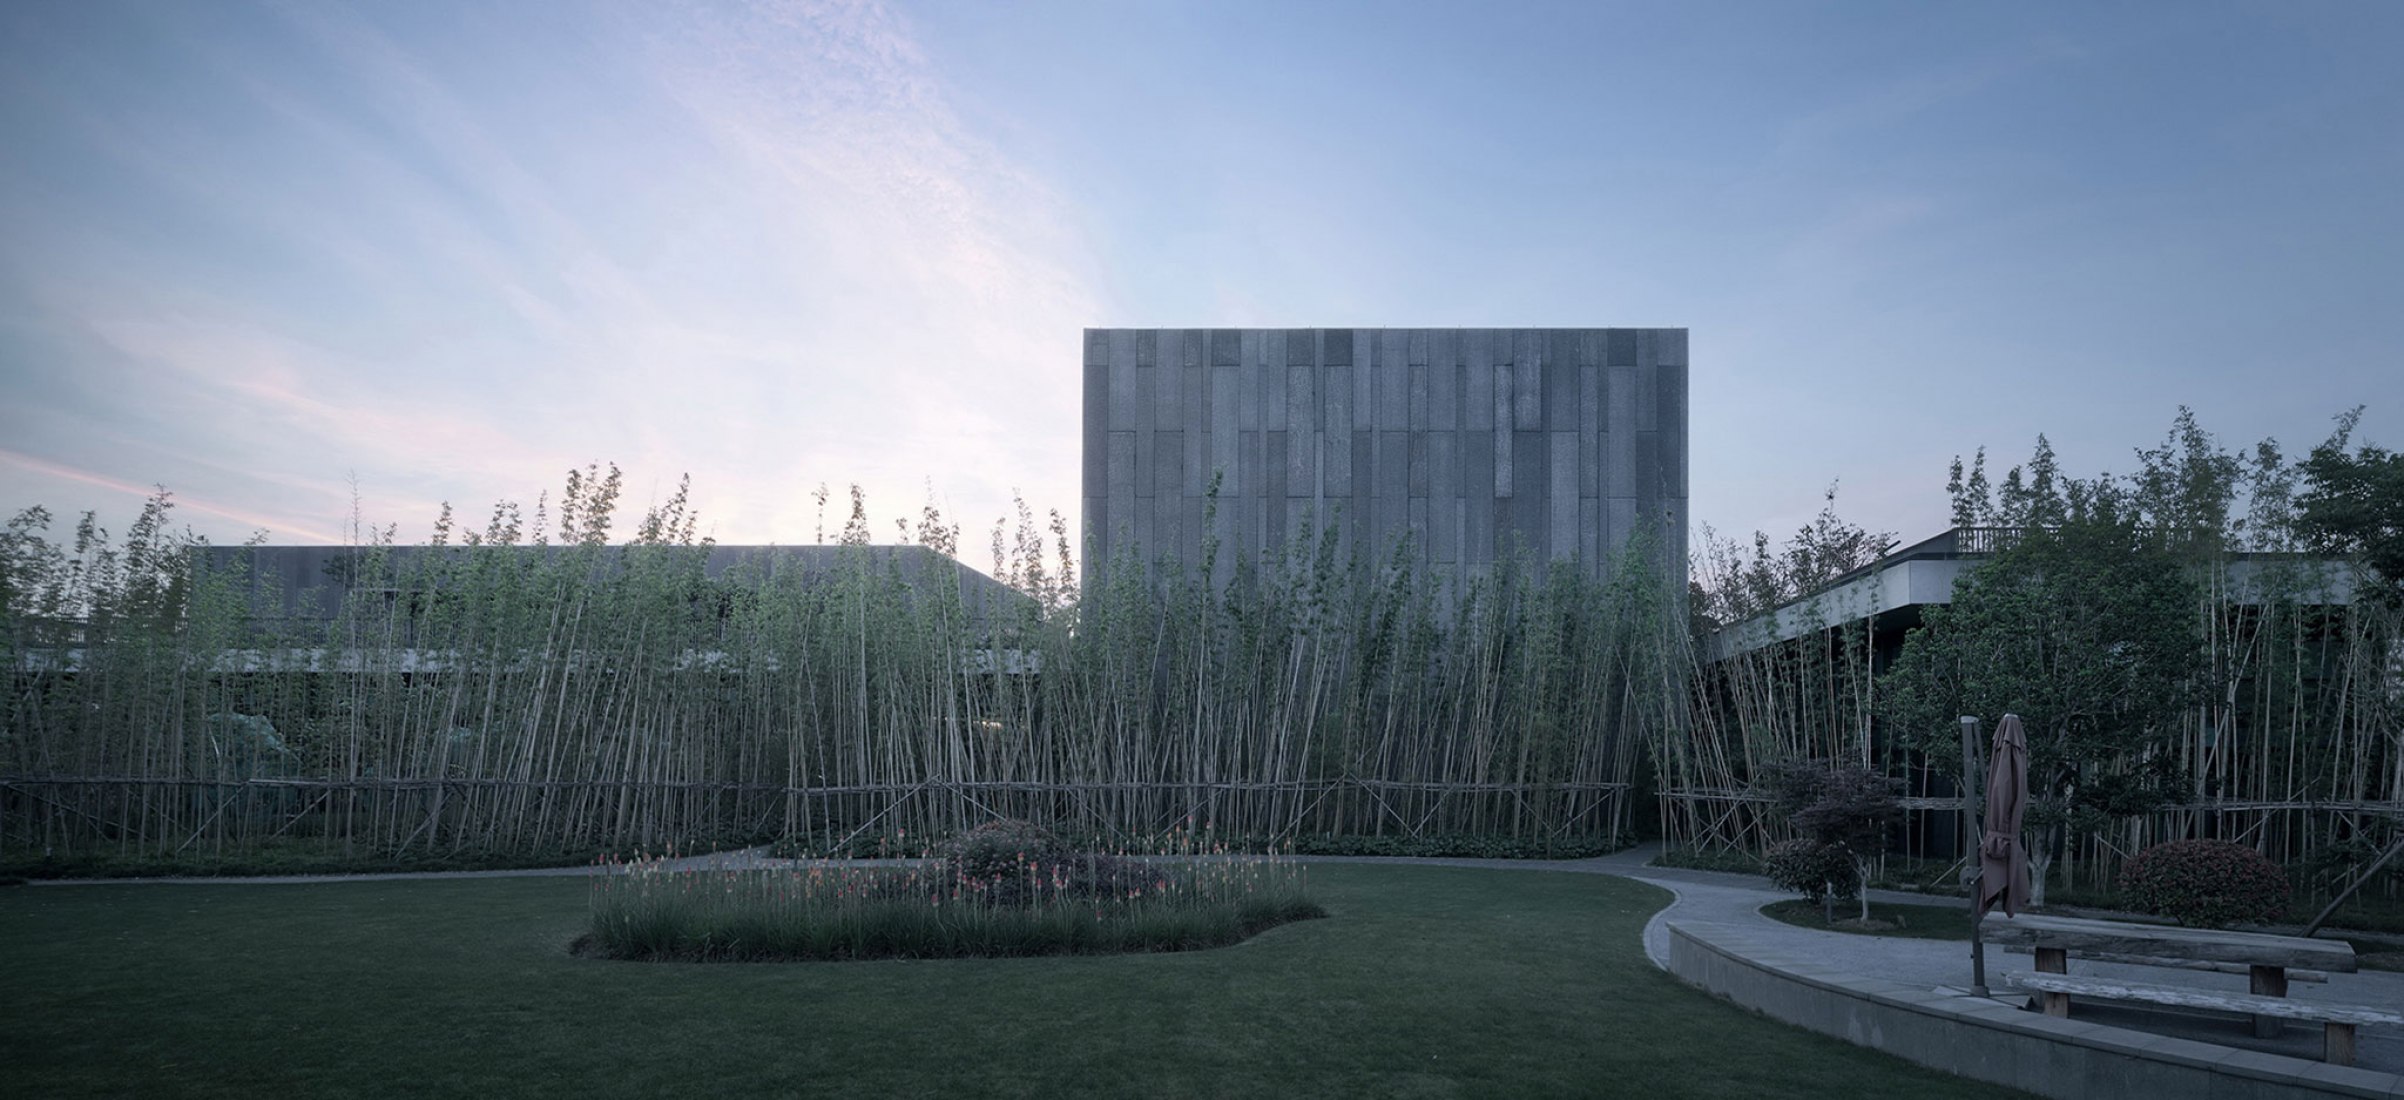 View from West. Cyrus Tang Foundation Center by UAD. Photograph by Zhao Qiang